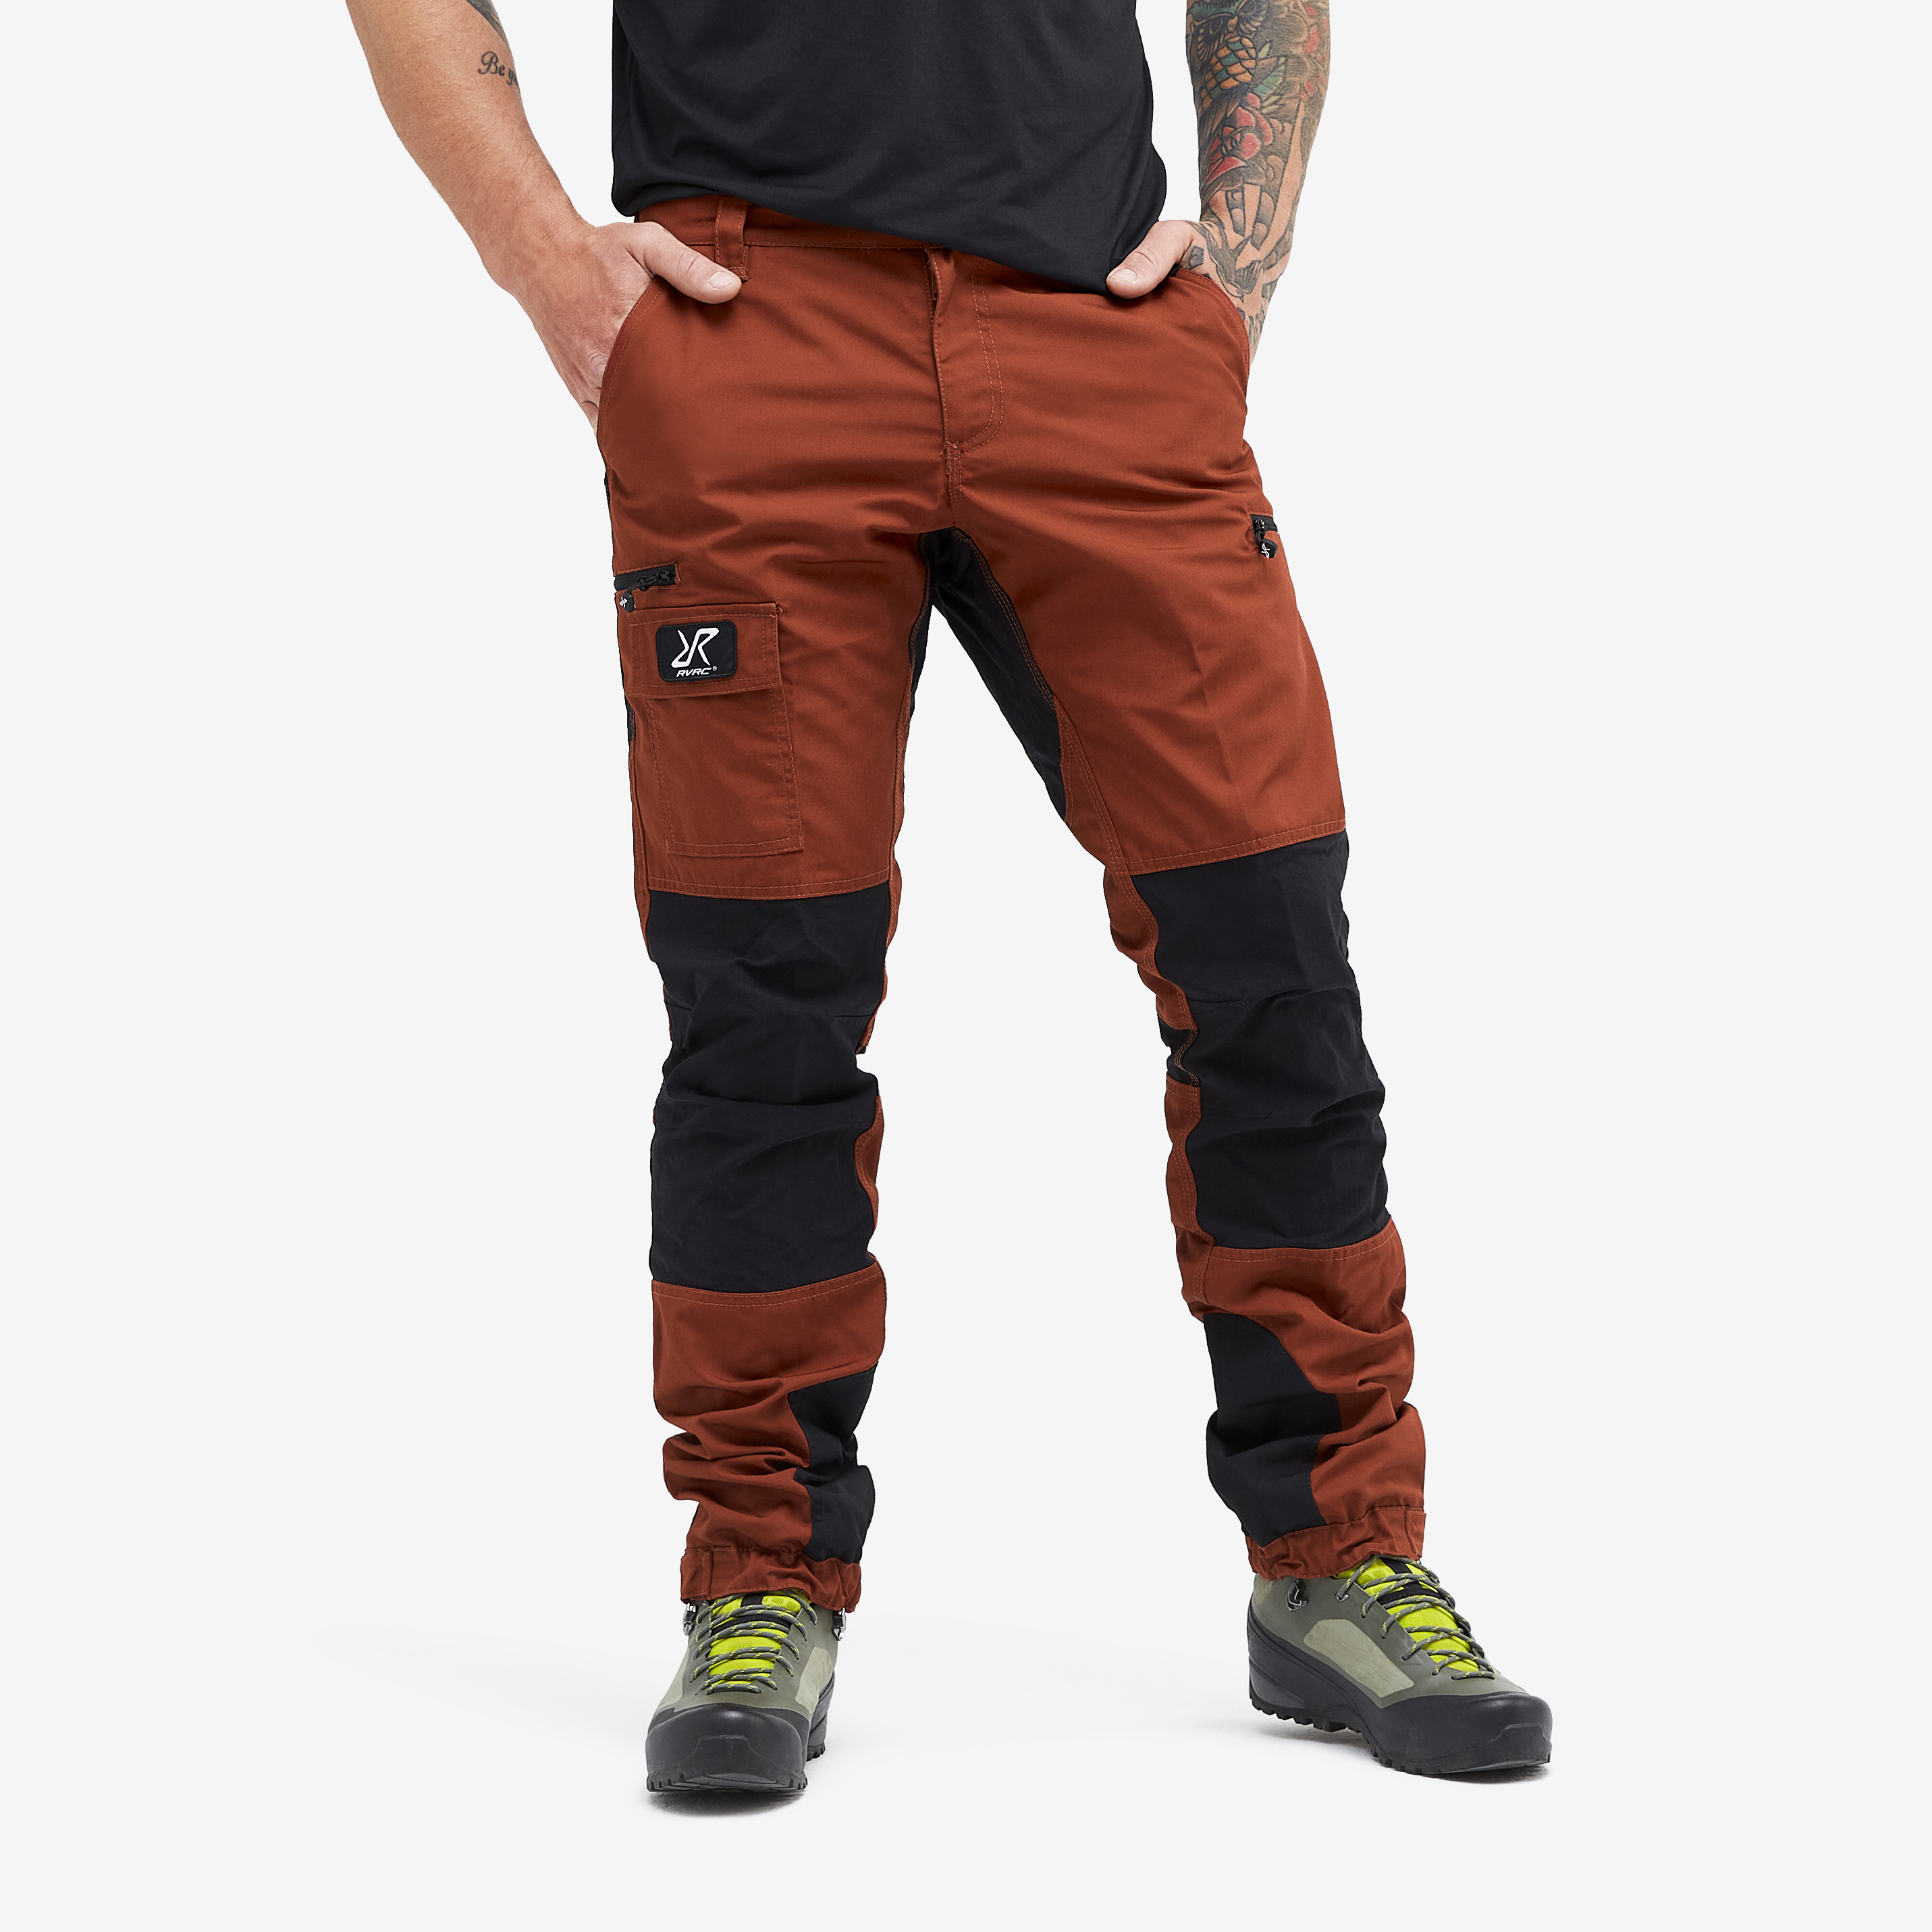 Nordwand Pants Rusty Orange Hombres